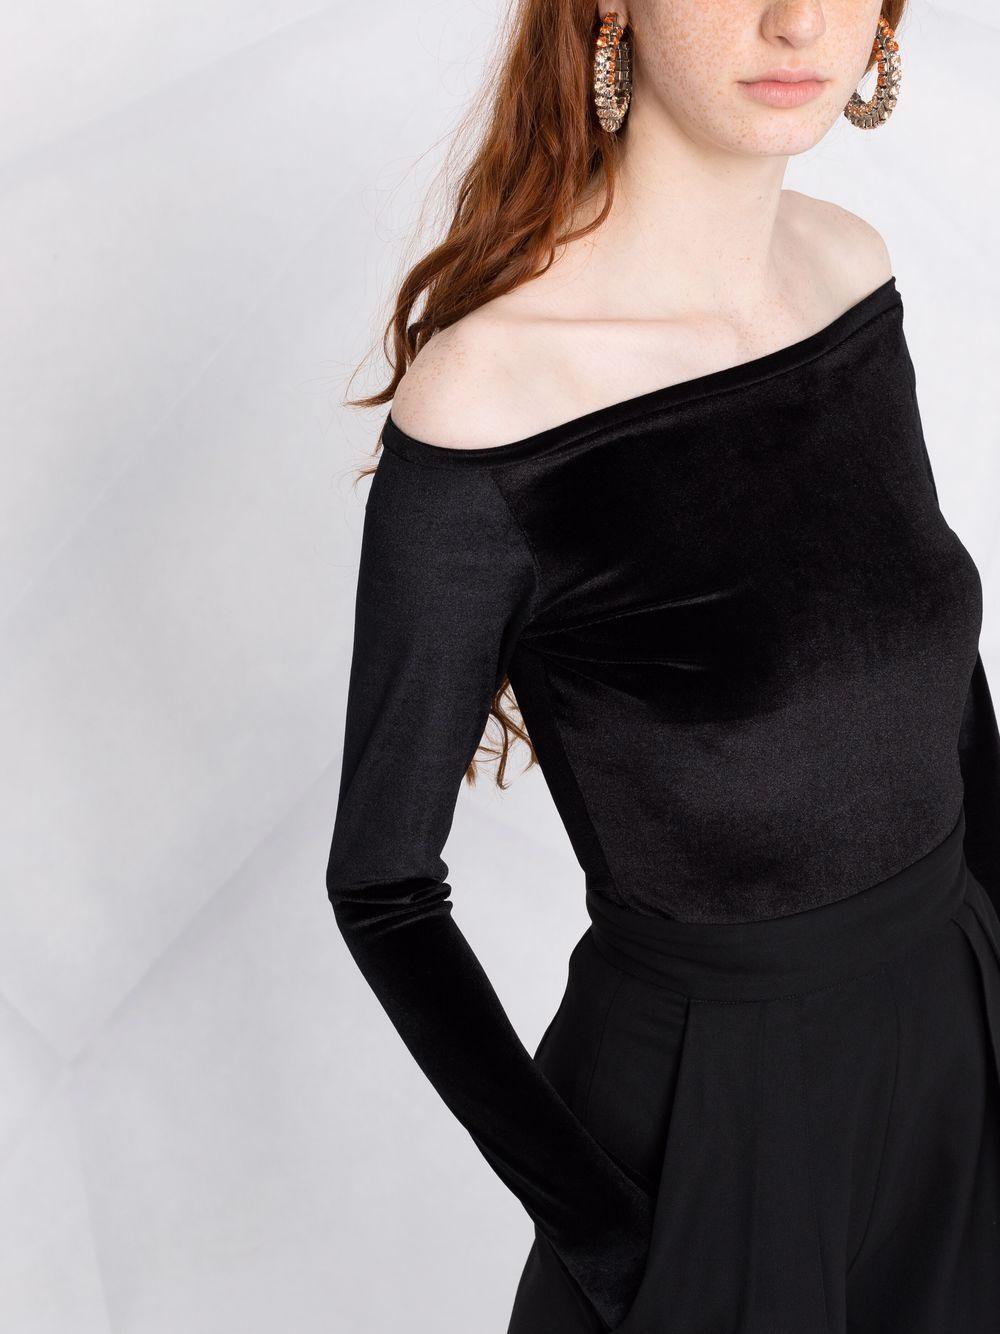 Atu Body Couture Off-shoulder Long-sleeve Top in Black